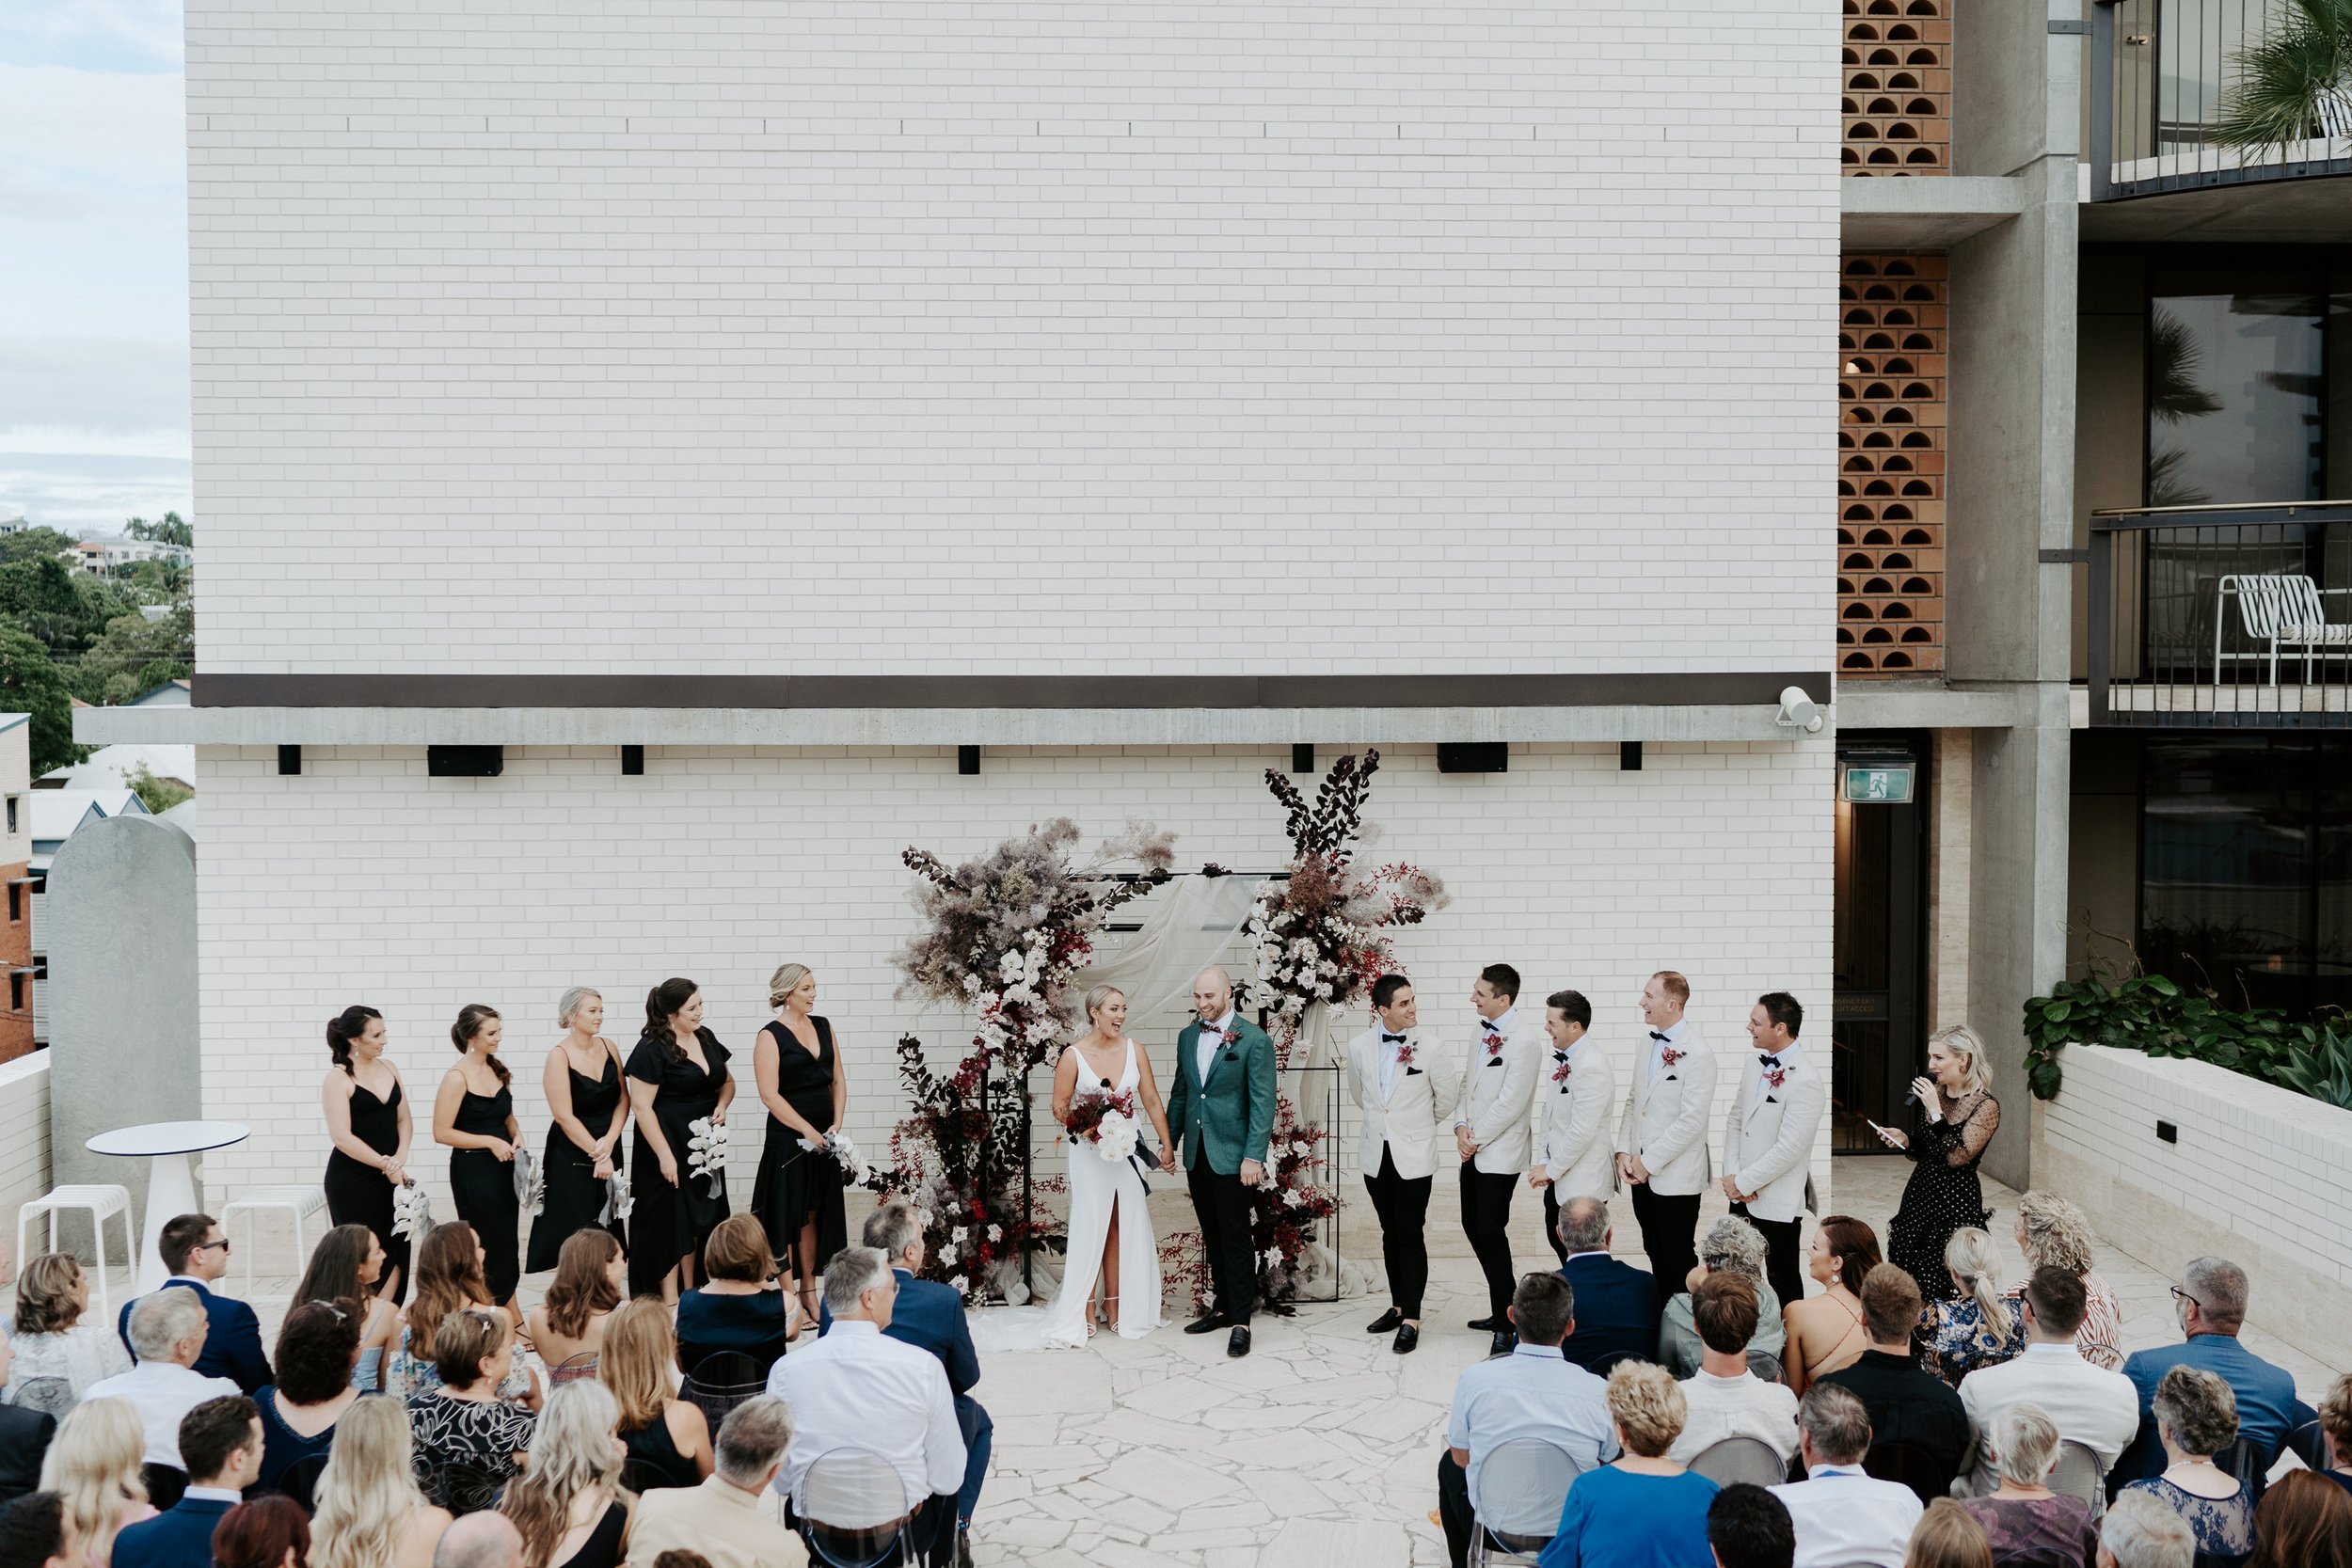 The Calile Hotel Wedding - Trent and Jessie Brisbane Photography and Videography